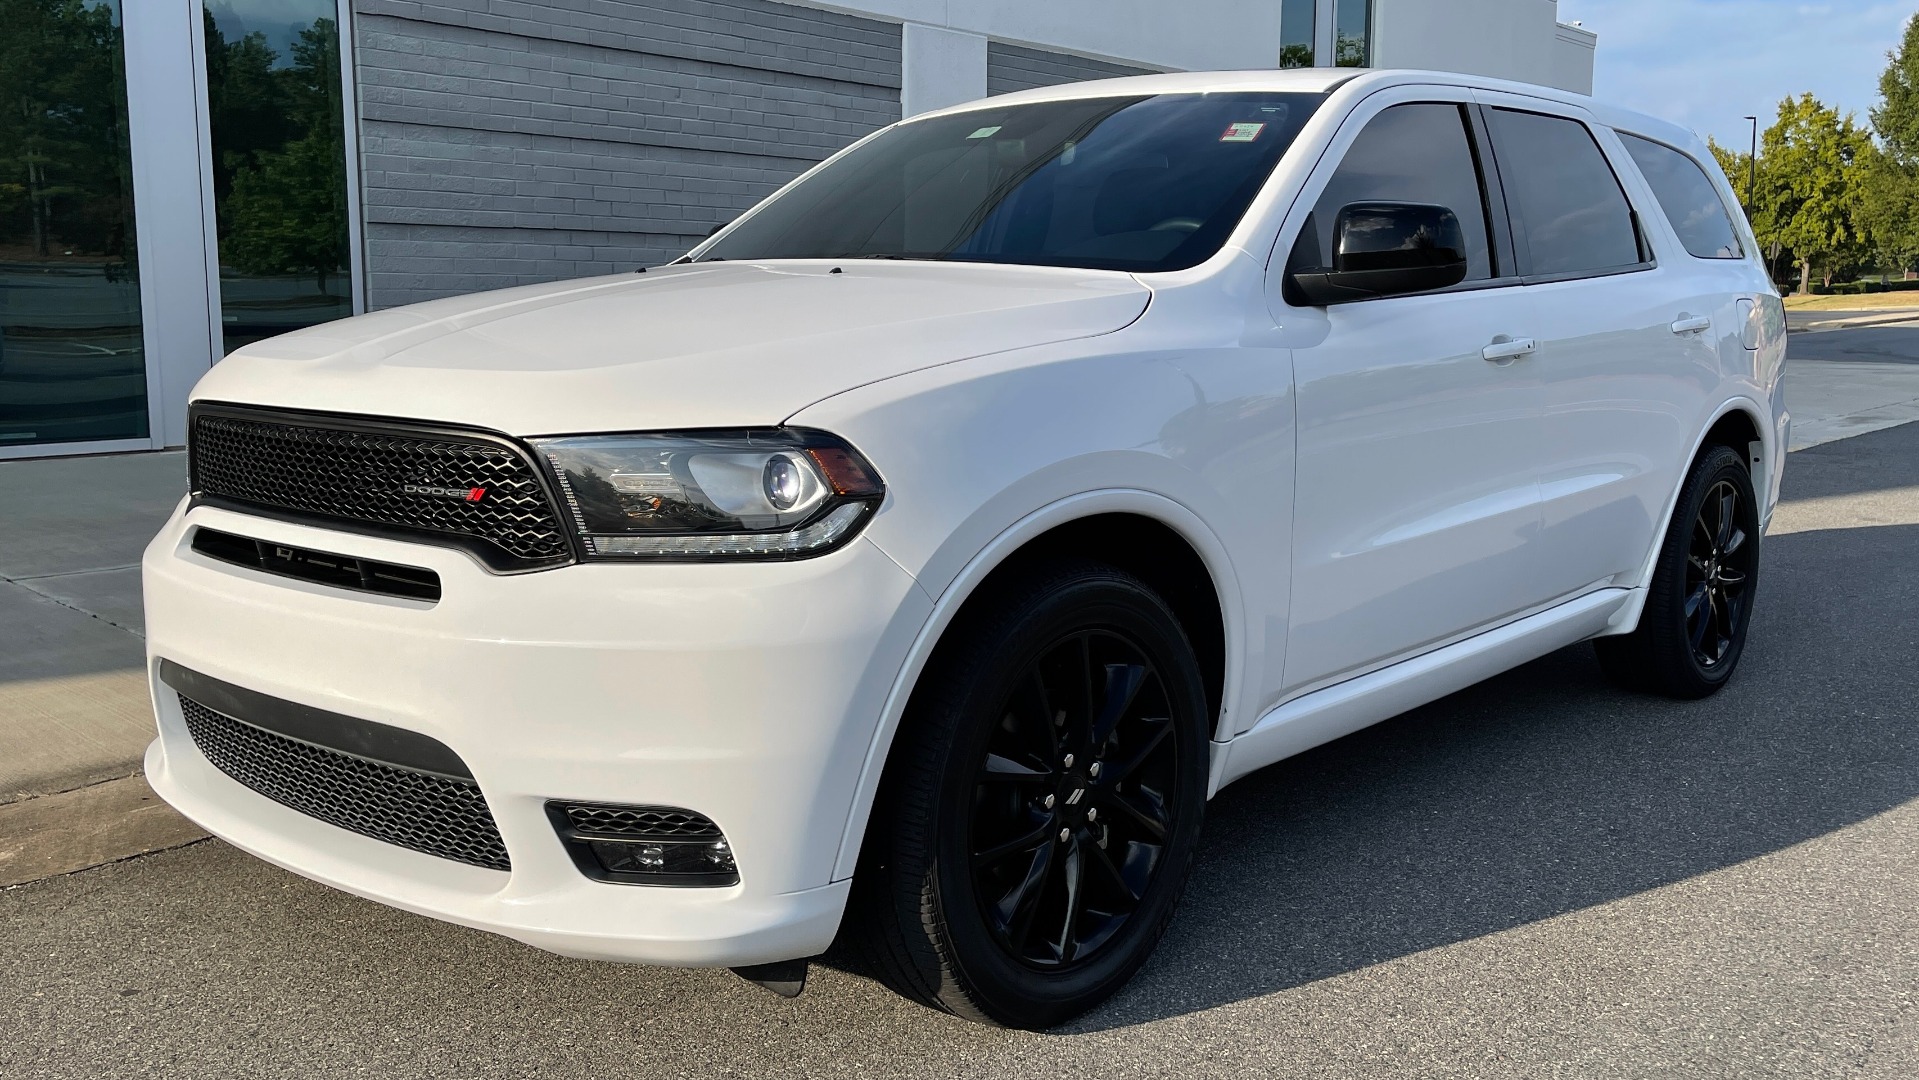 Used 2019 Dodge DURANGO GT BLACKTOP RWD / 3.6L / 8-SPD AUTO / 3-ROW / NAV / REARVIEW for sale Sold at Formula Imports in Charlotte NC 28227 3